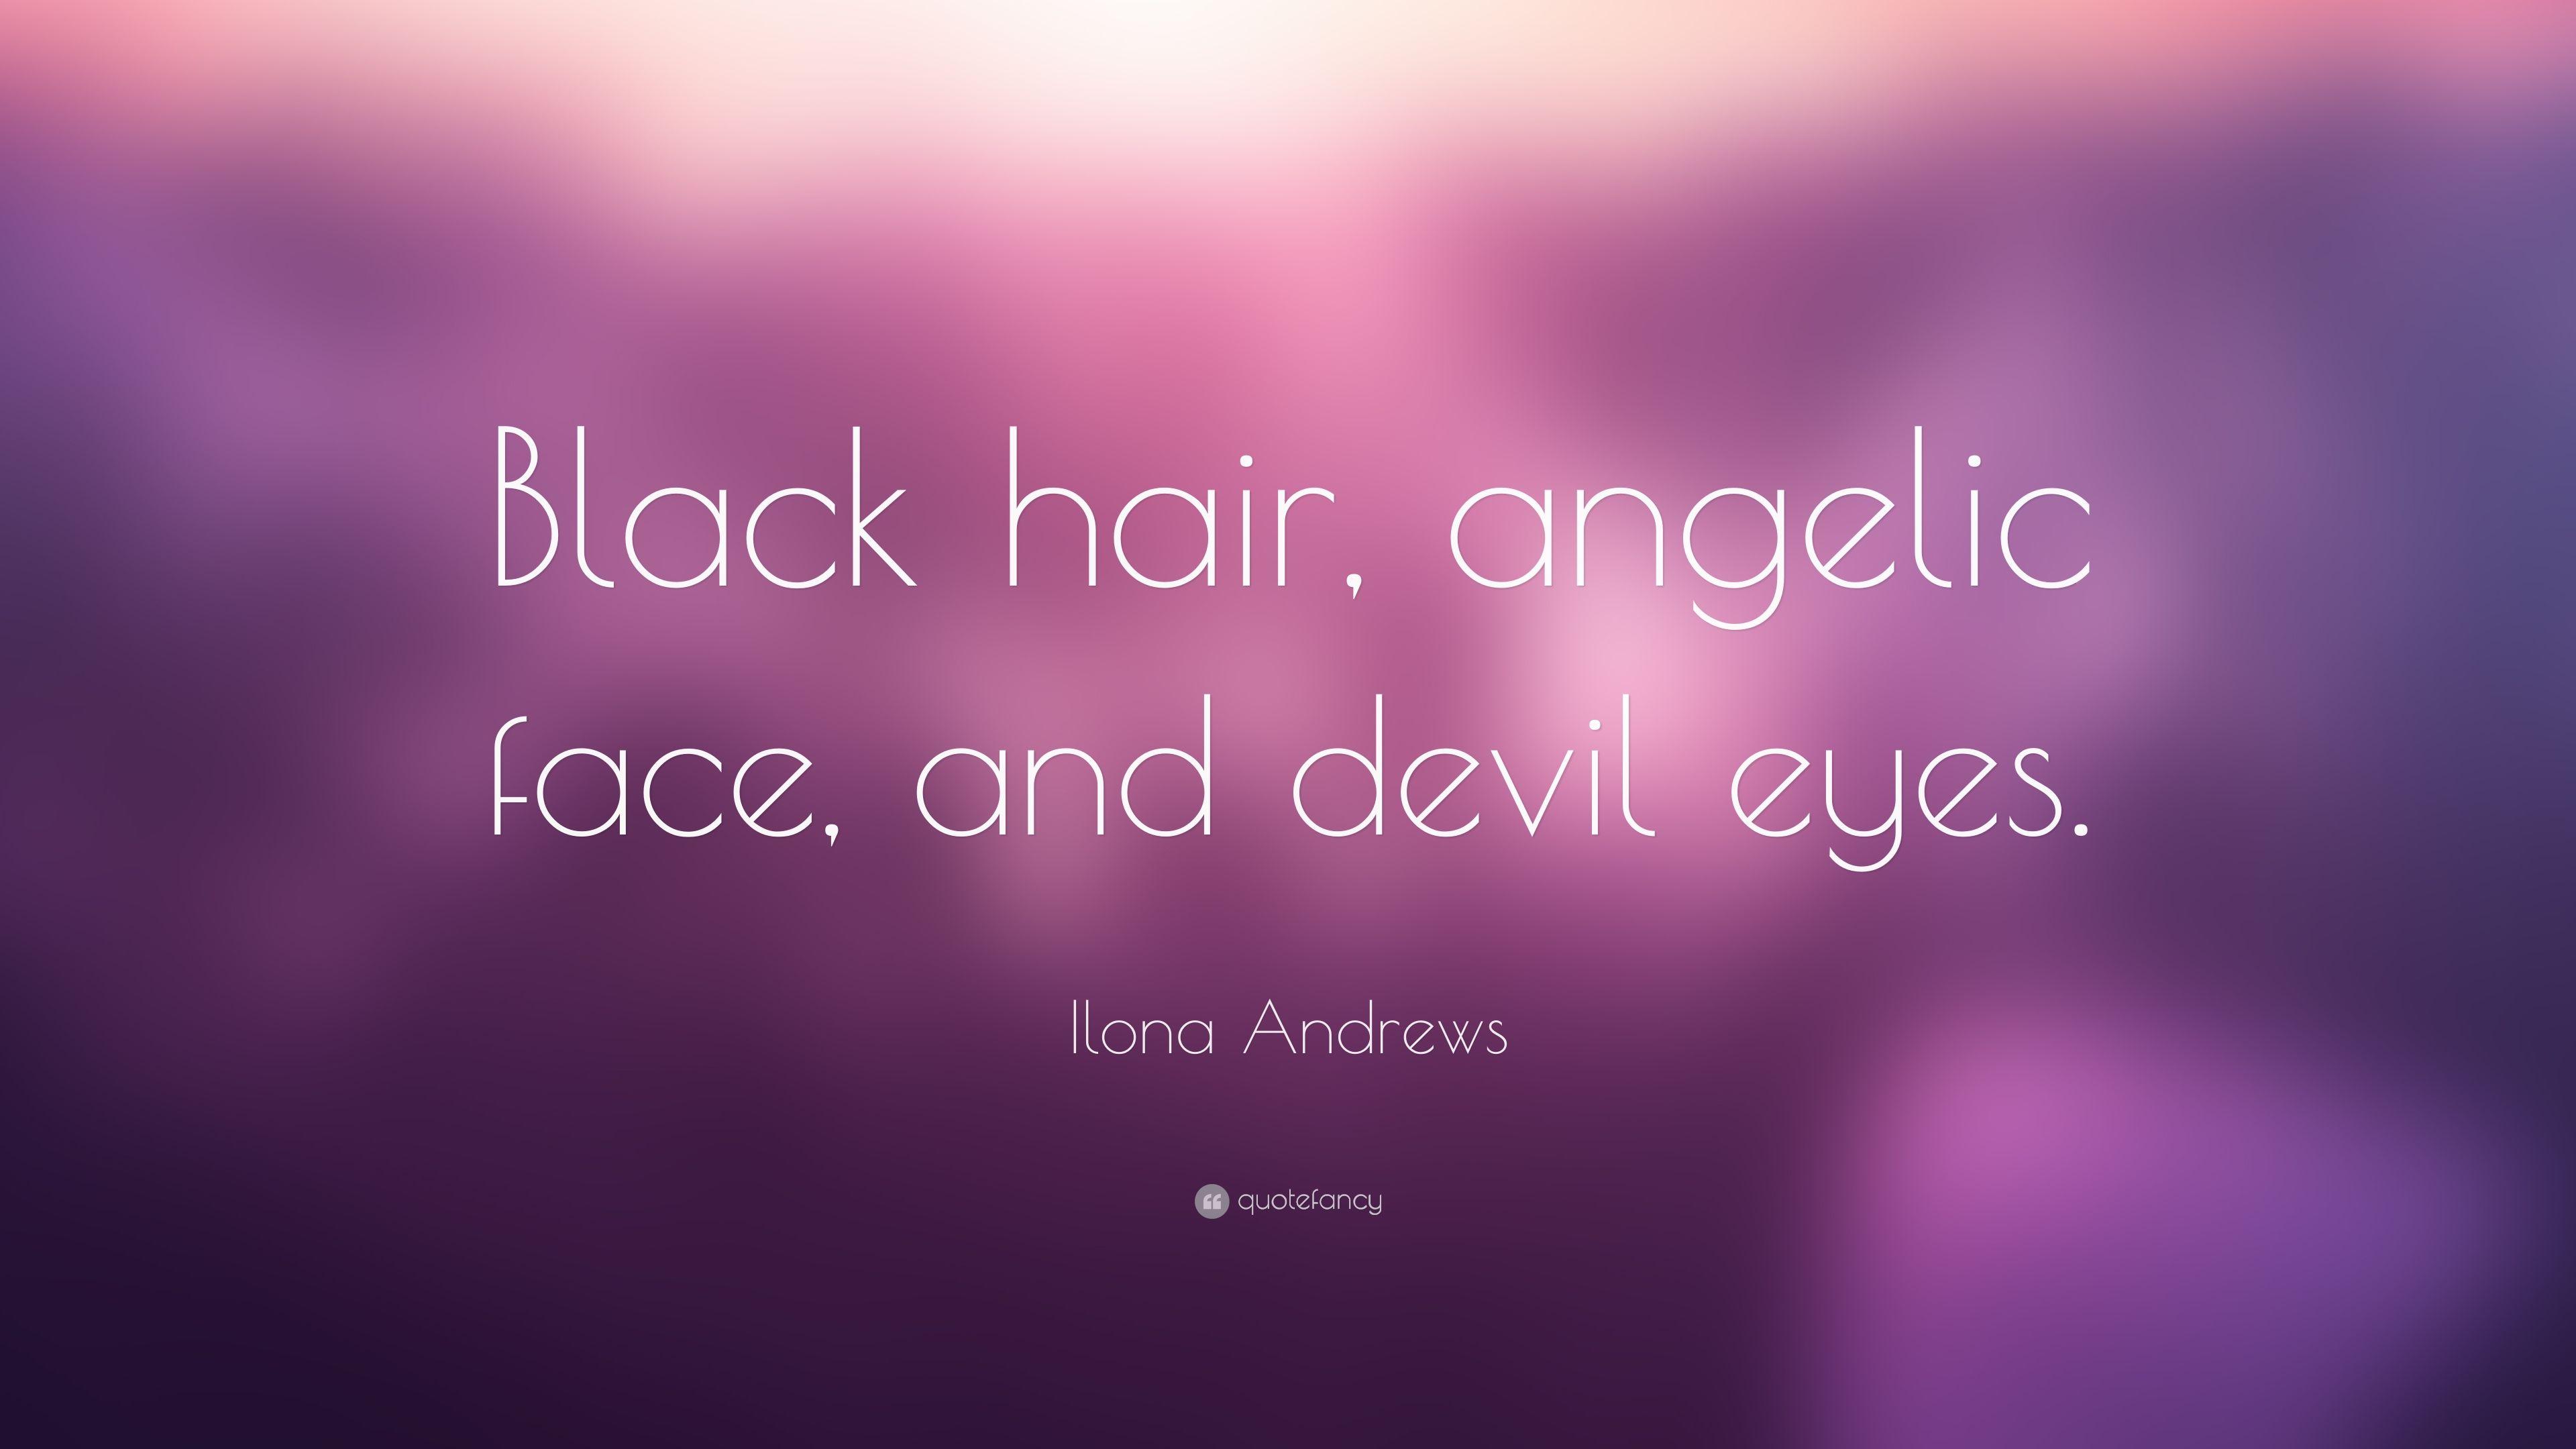 Ilona Andrews Quote: “Black hair, angelic face, and devil